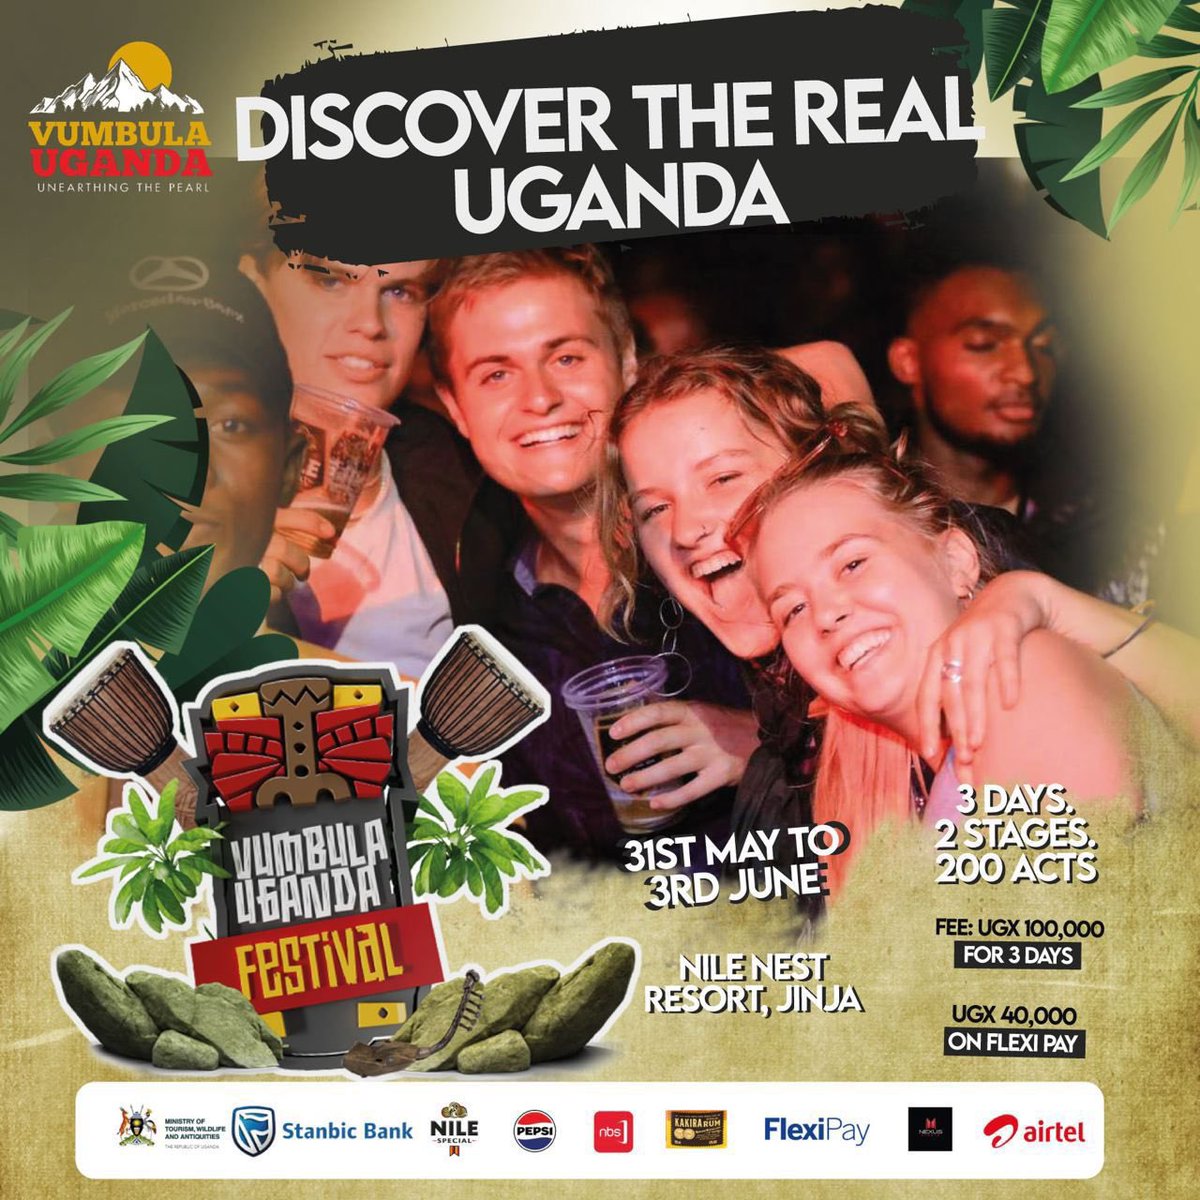 Set off on a once-in-a-lifetime journey through Uganda's captivating tourism at #VumbulaUgandaFestival. Join us from May 31st to June 3rd to explore, discover, and make memories that will endure forever. #GreeningTheNile